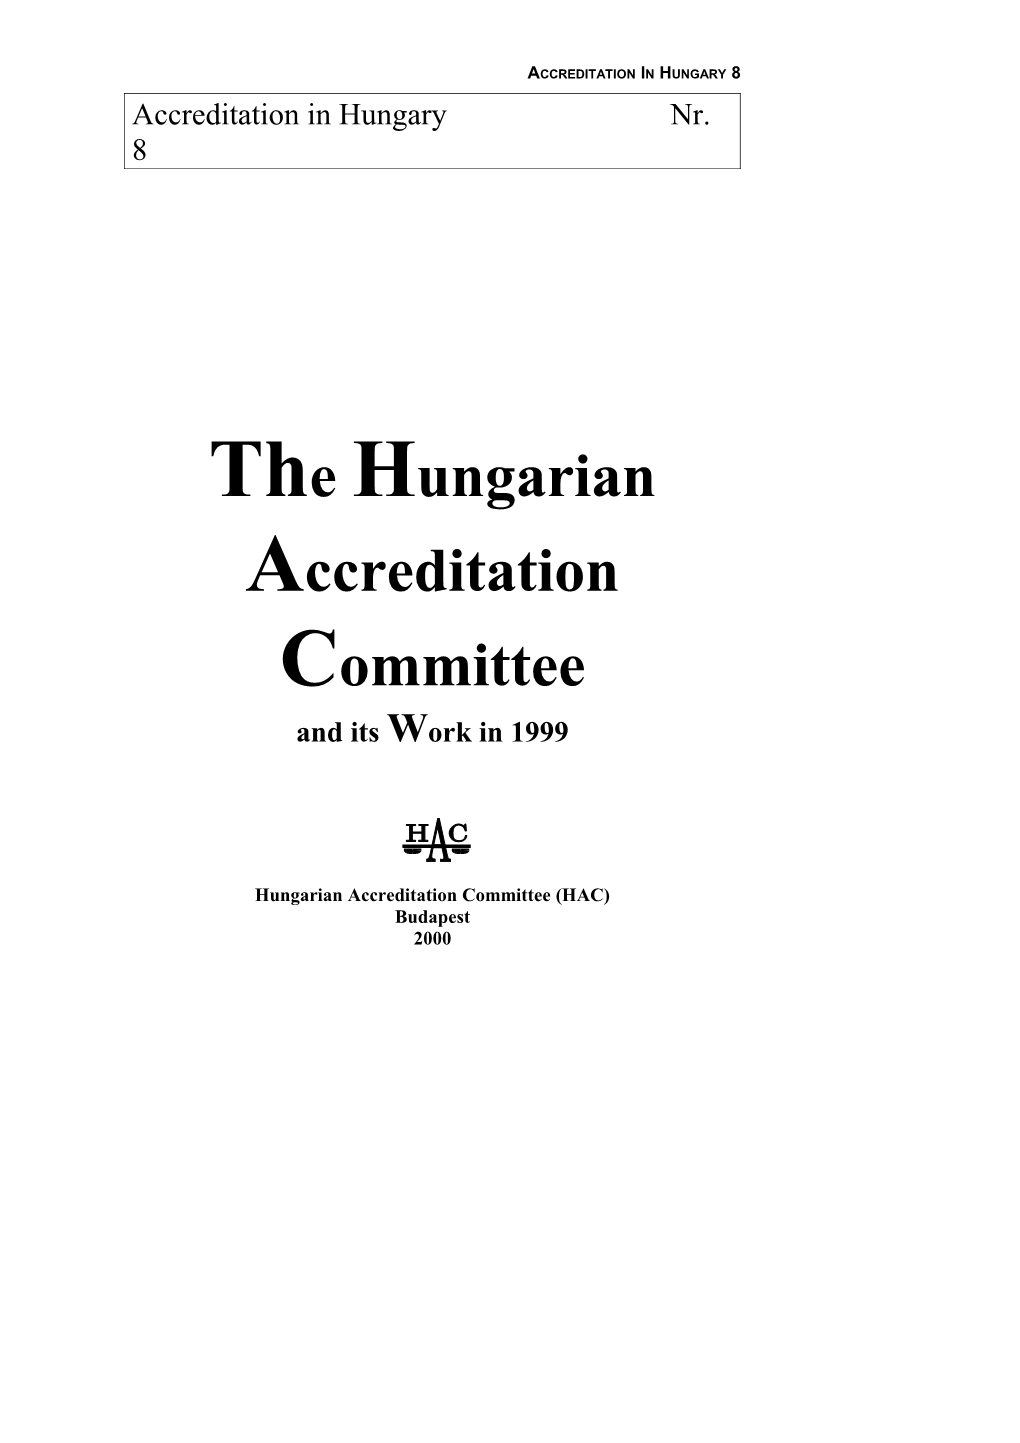 The Hungarian Accreditation Committee